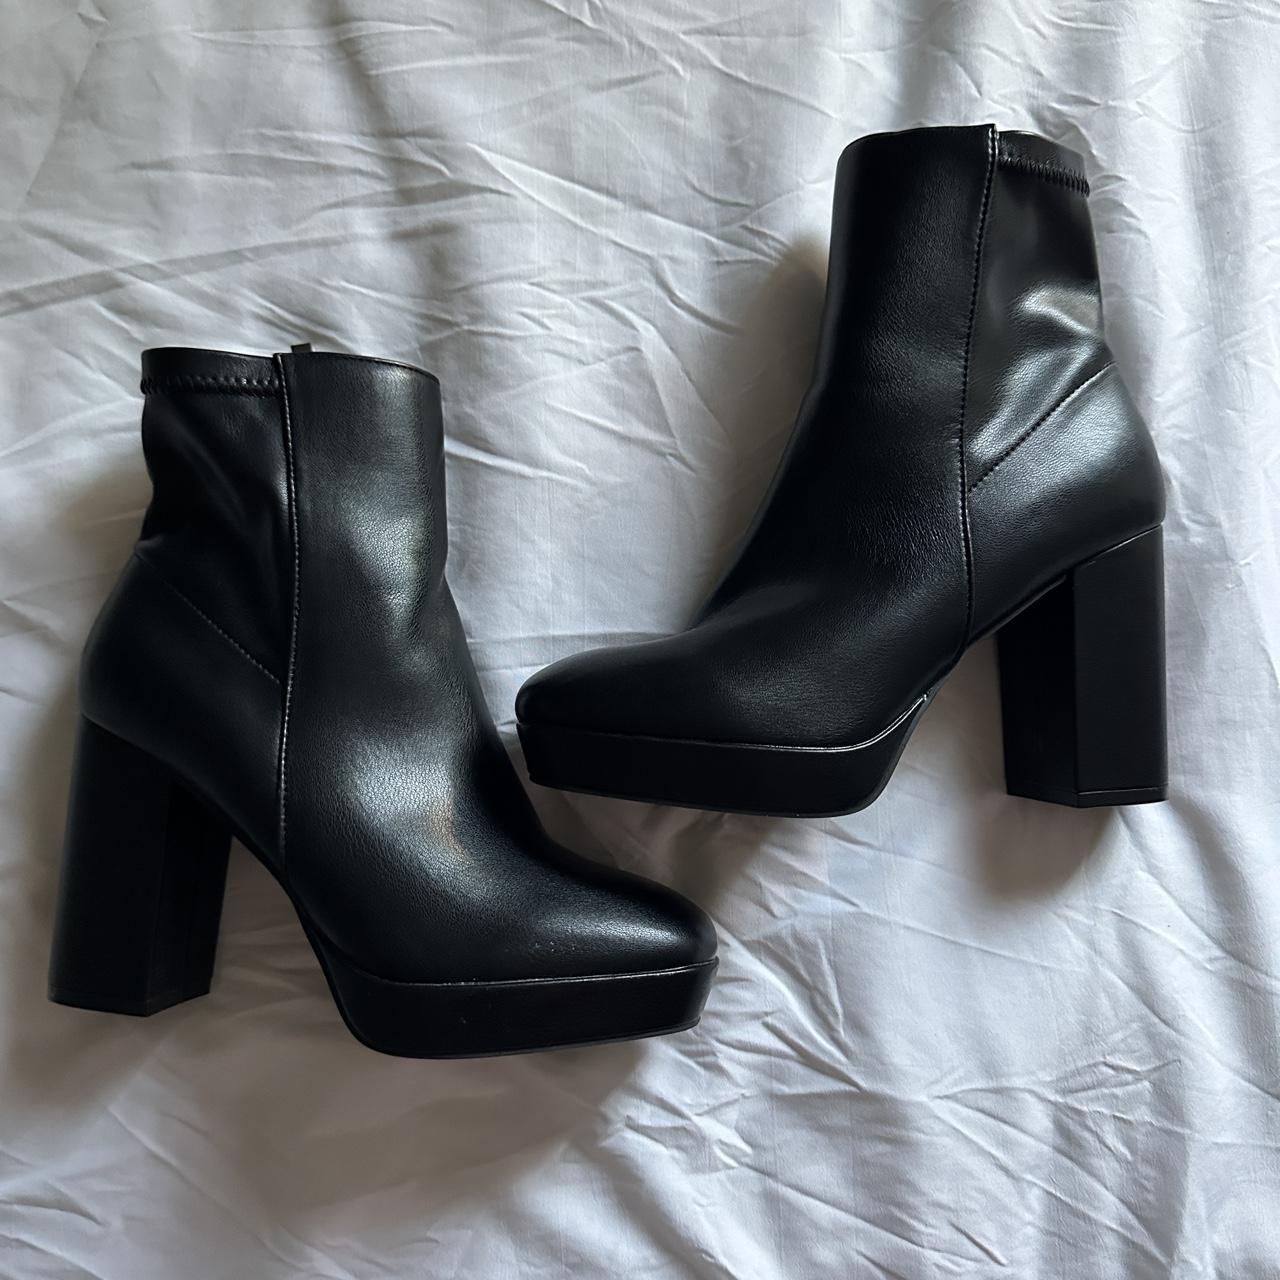 cute black leather boots! US size 8 in women’s no... - Depop